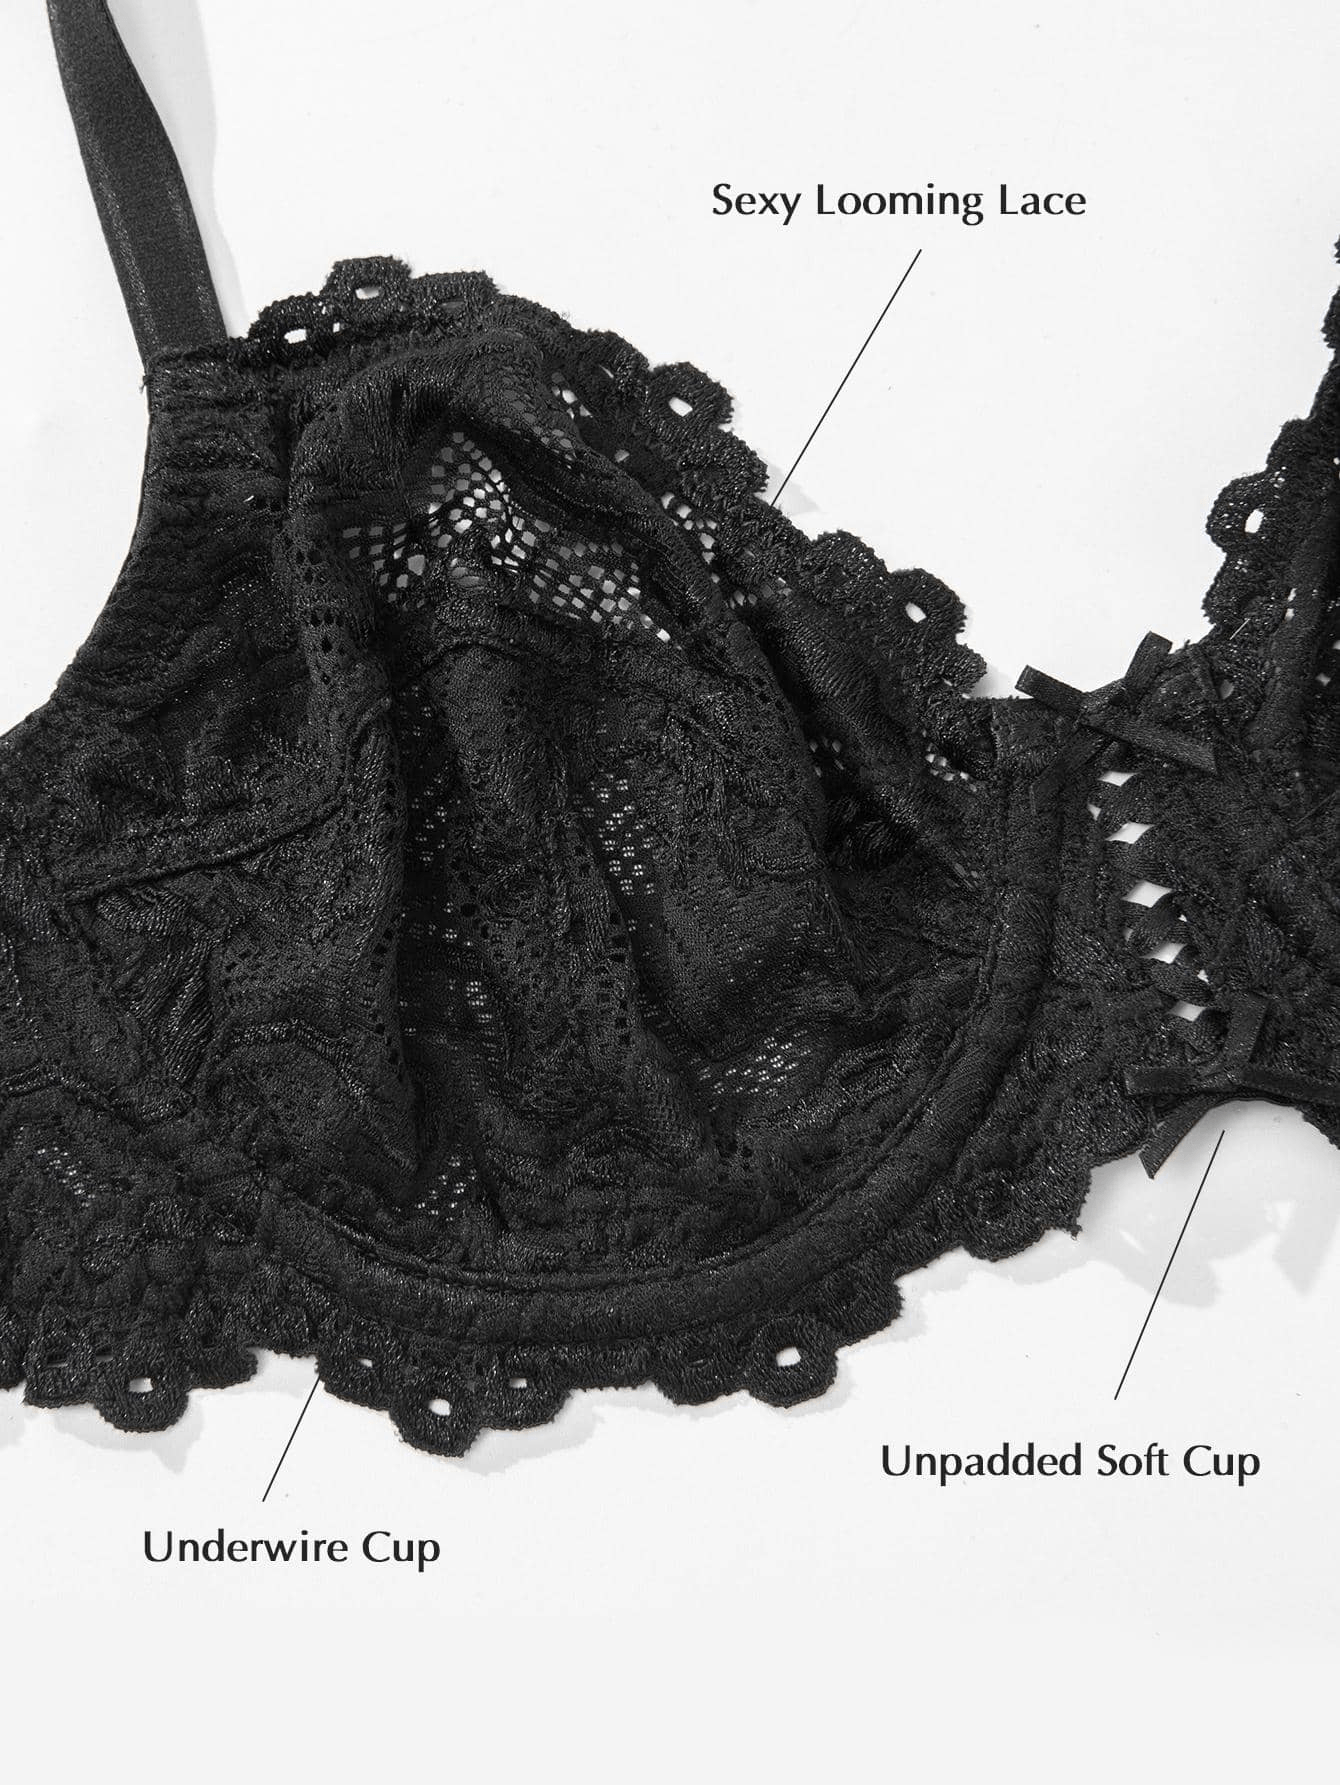 Full Coverage Non-Padded Floral Lace Bra Soft Cup For Plus Size